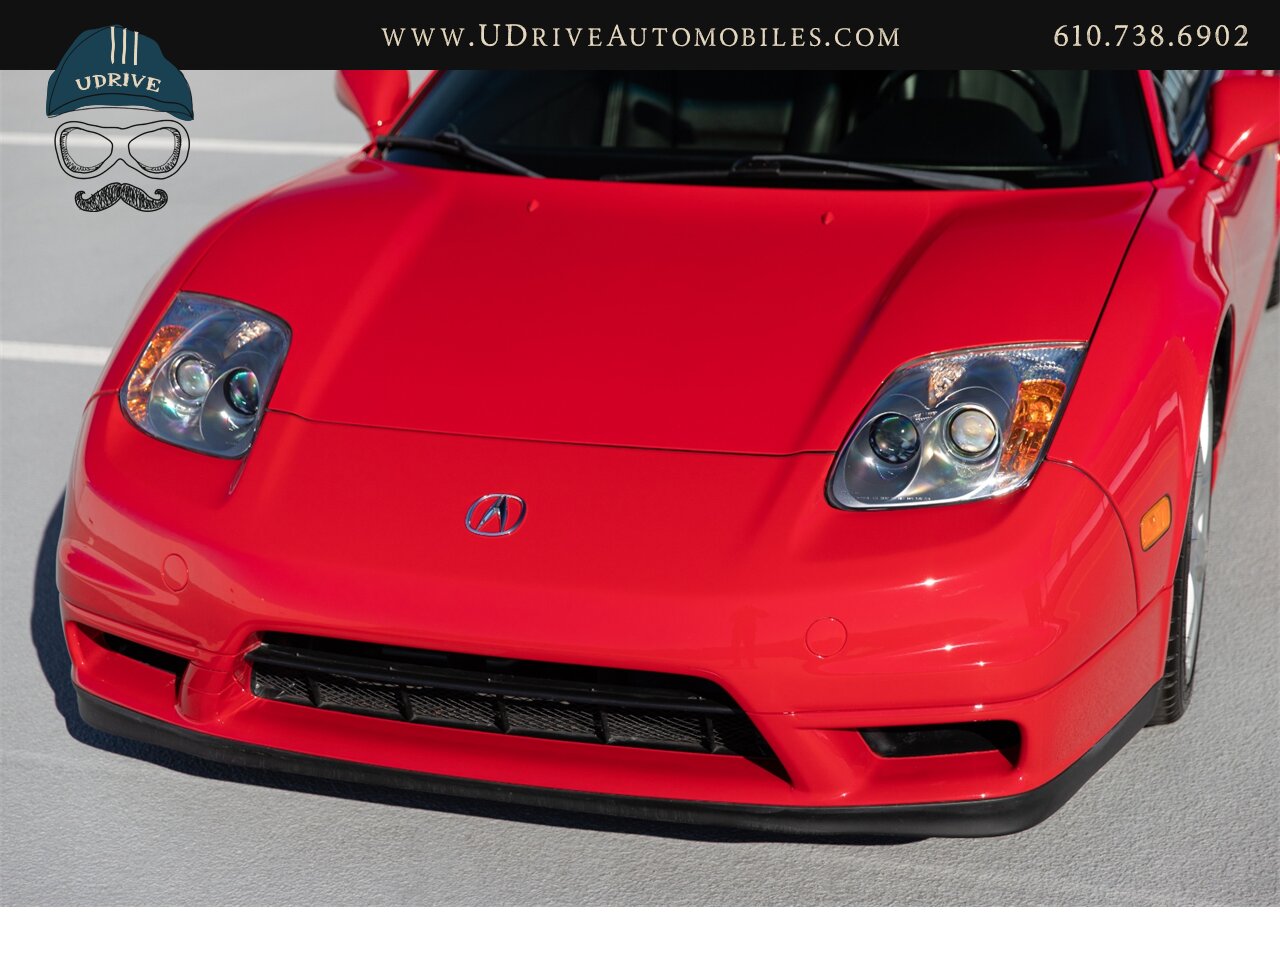 2004 Acura NSX NSX-T 21k mIles Red over Black  Fresh Timing Belt Service - Photo 10 - West Chester, PA 19382